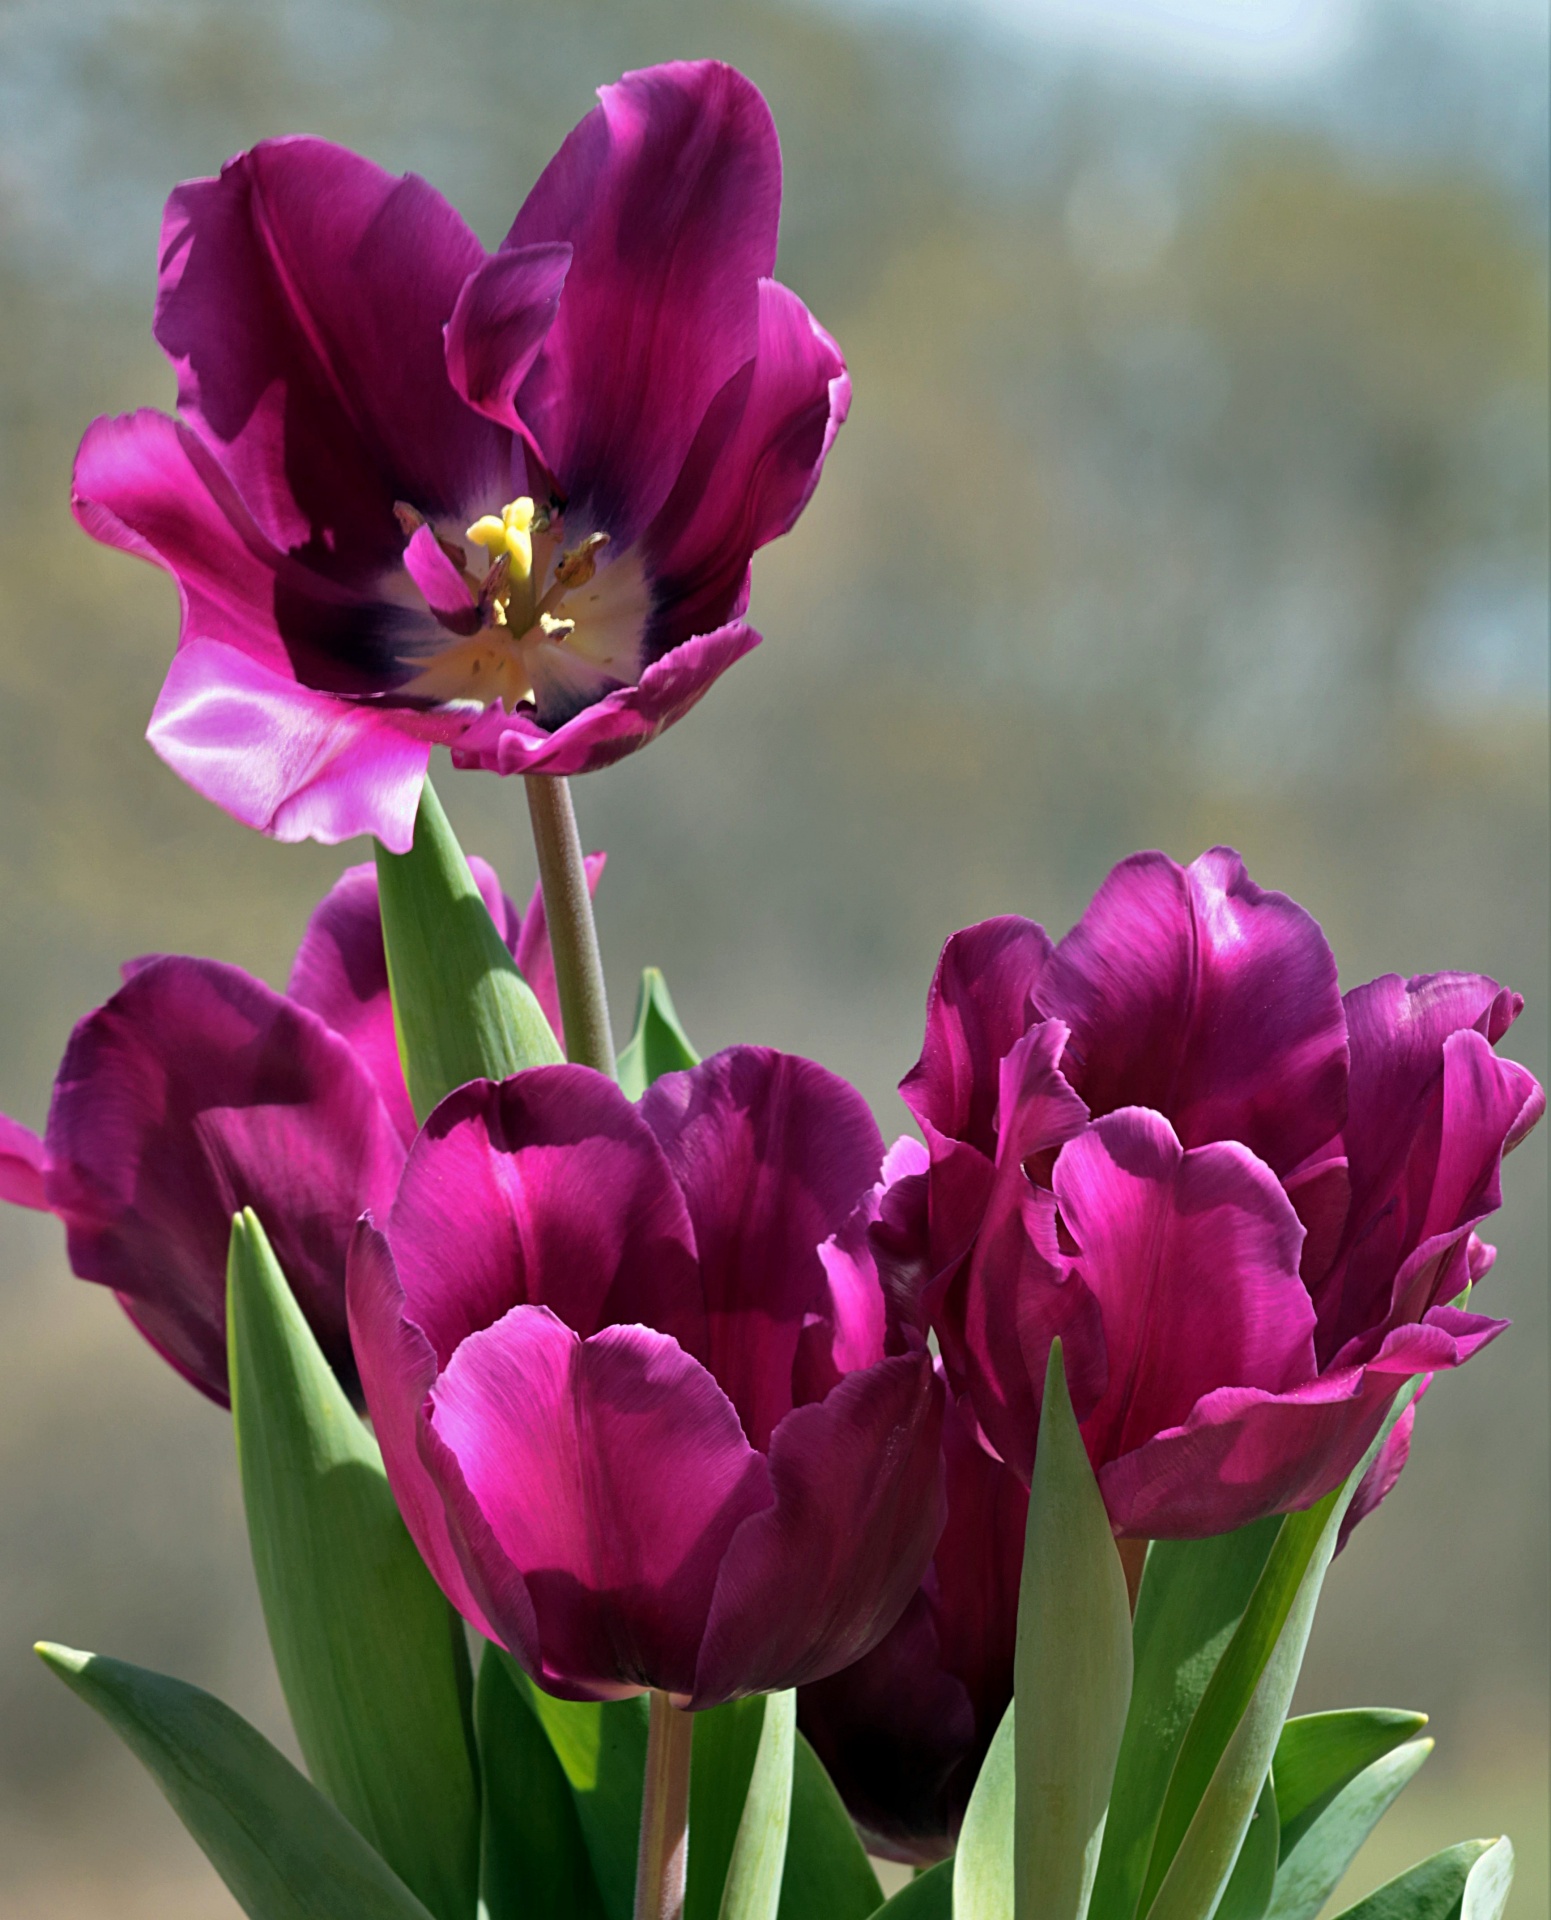 A group of four purple tulips with green leaves on a blurred blue and green background.